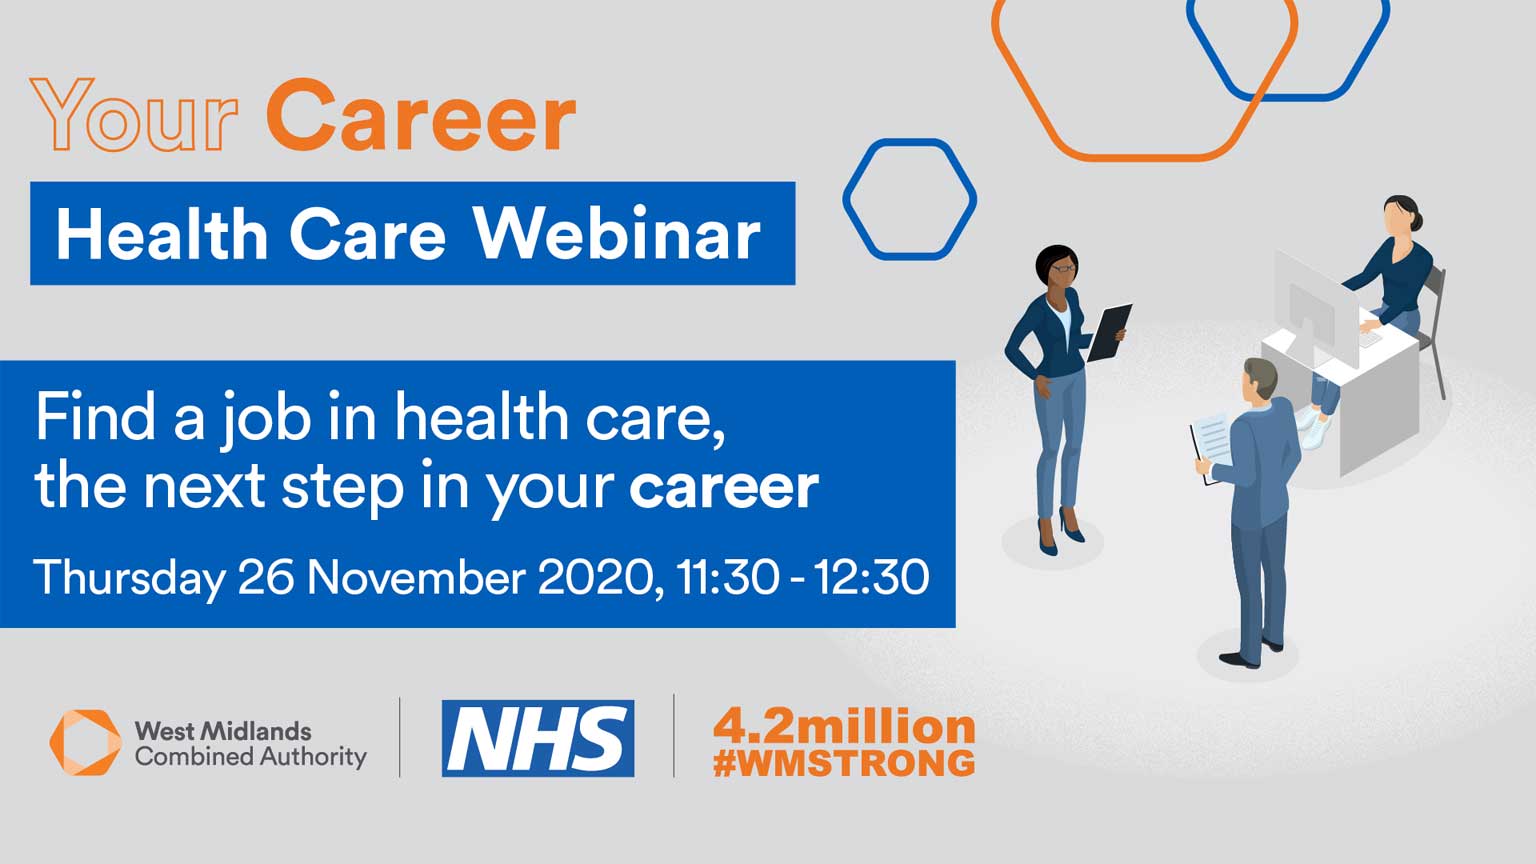 Image for: Your Career Healthcare Webinar